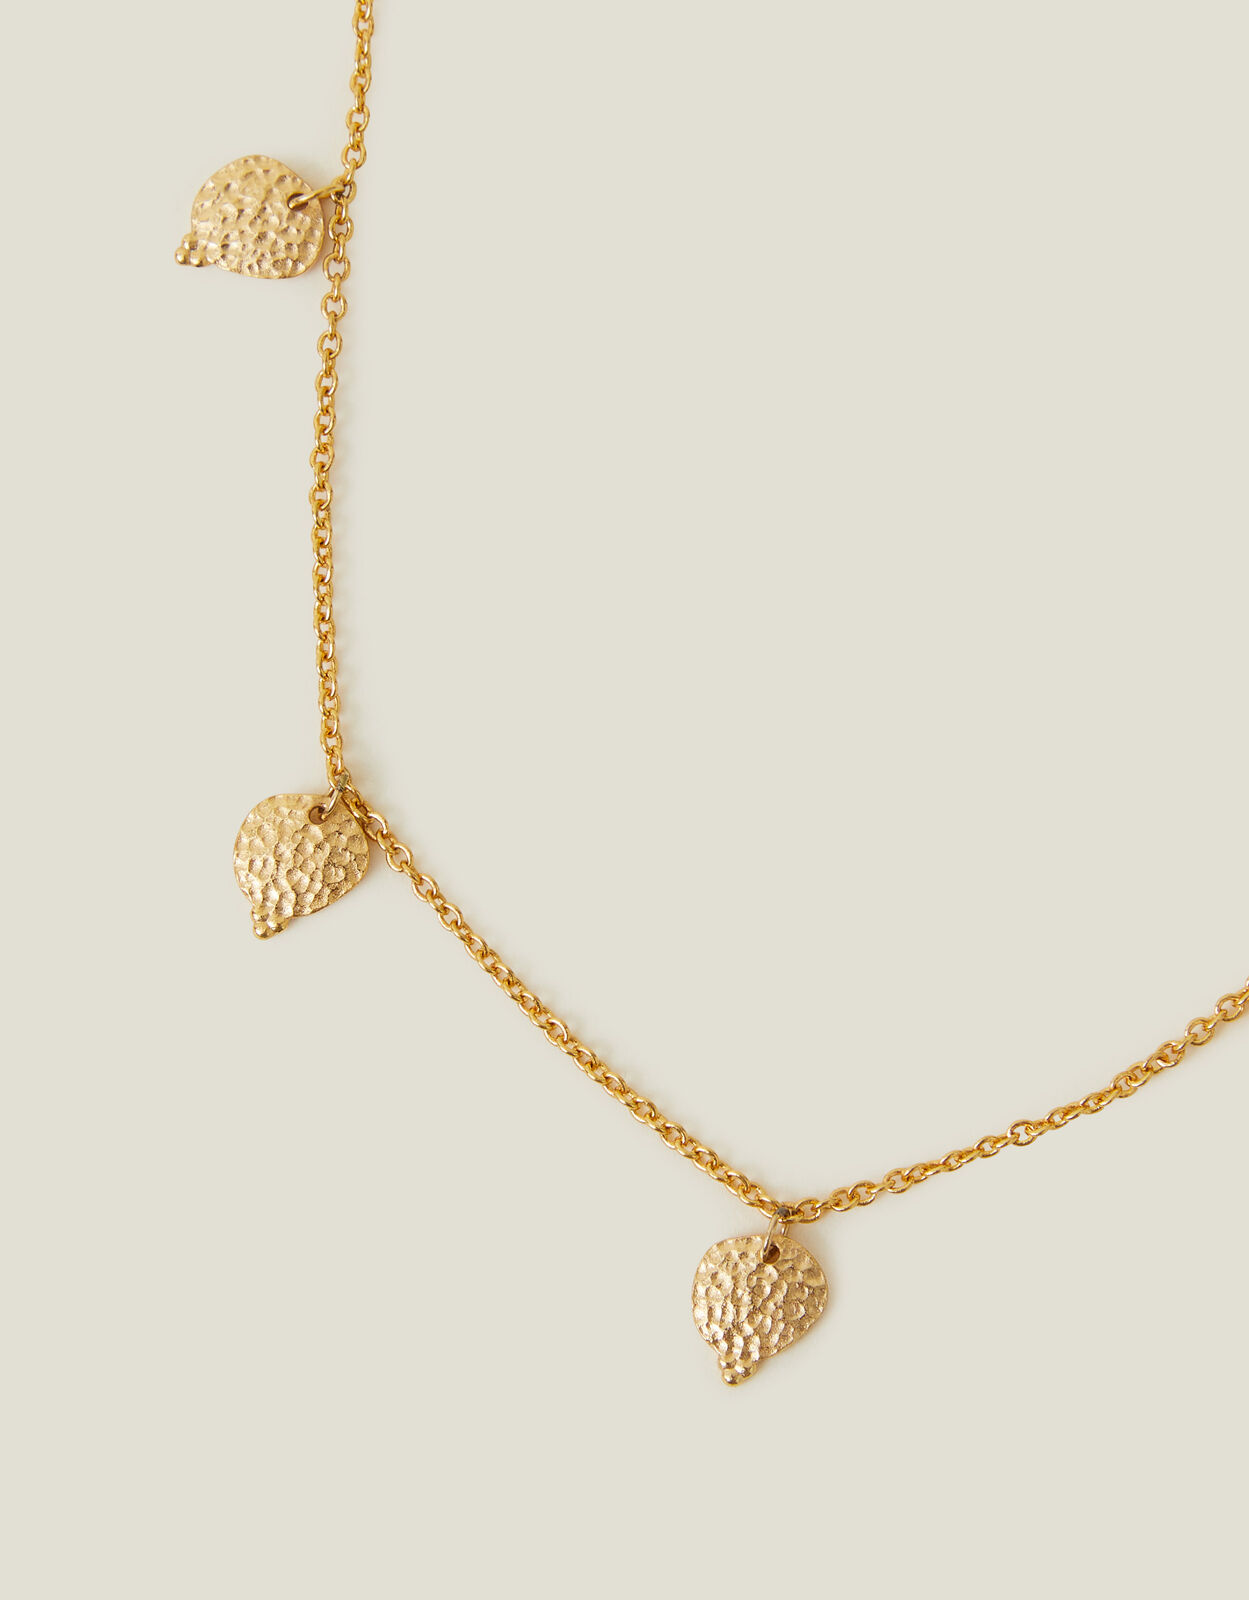 14ct Gold-Plated Station Bobble Charm Necklace